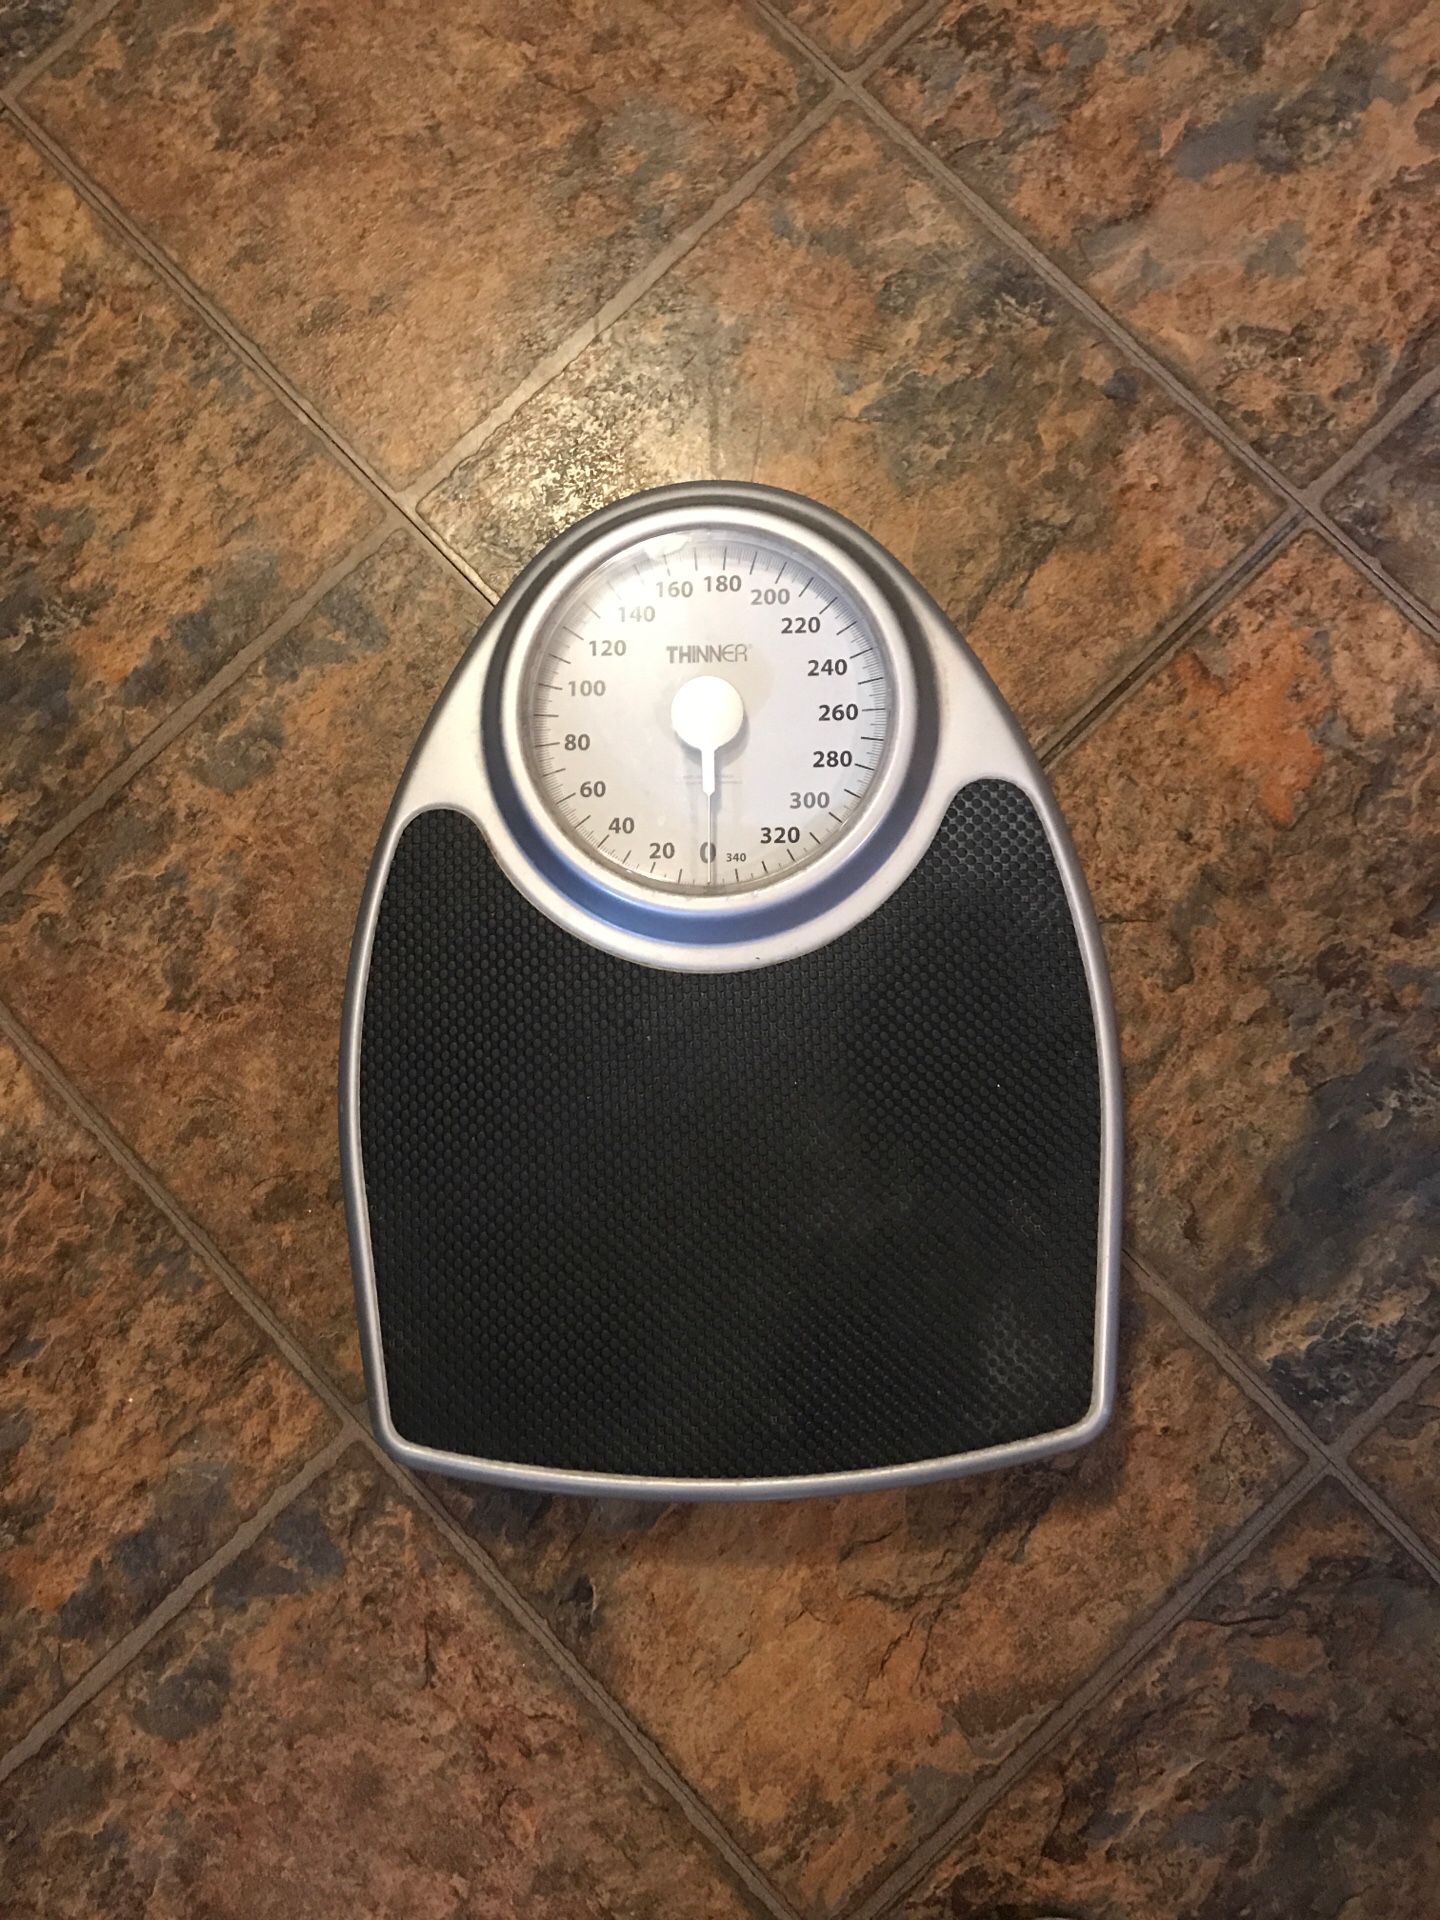 Thinner Extra-large Dial Analog Bathroom Scale